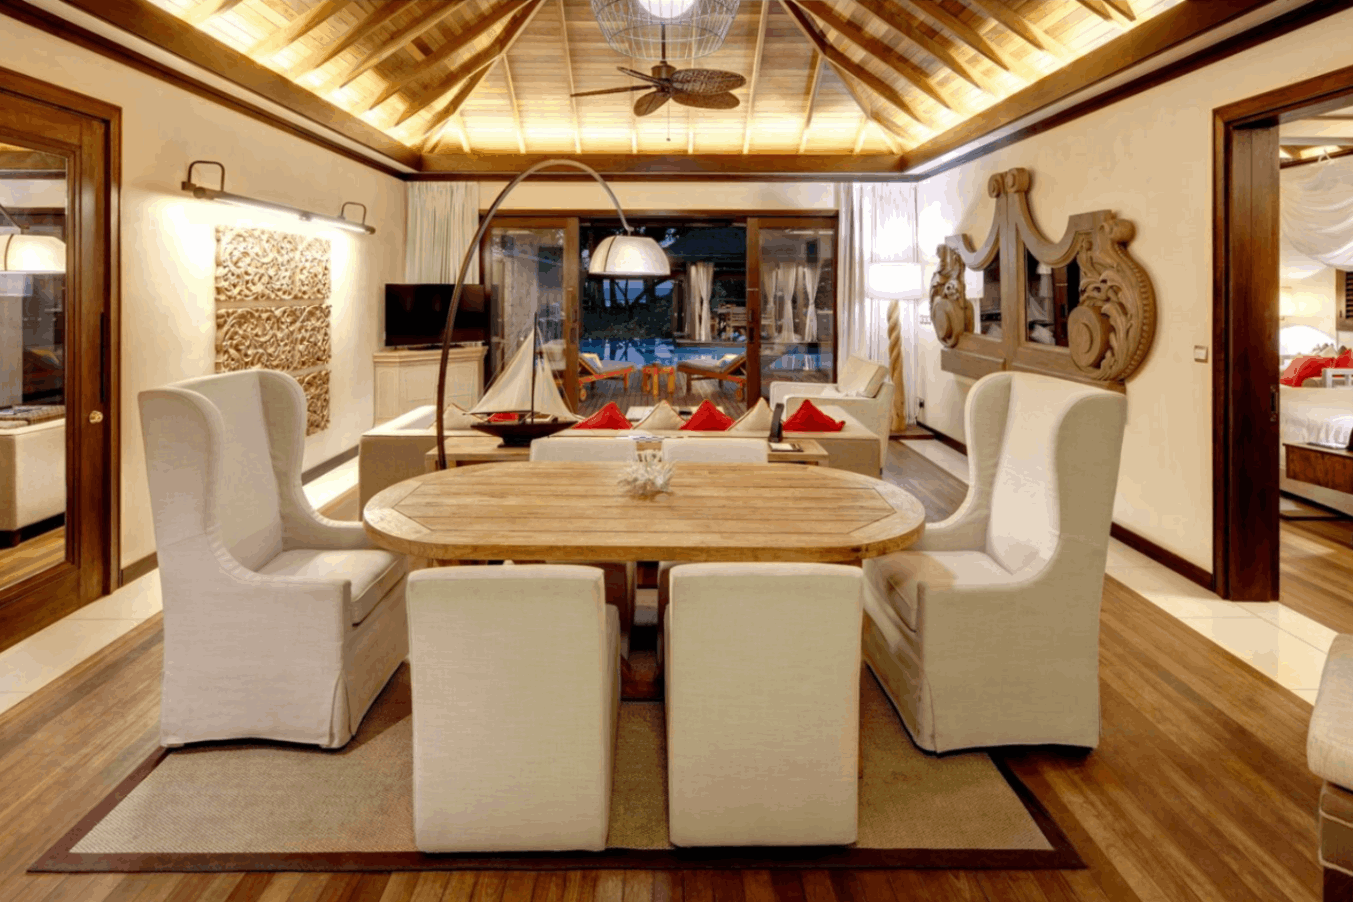 Elegant dining area inside a Seychelles luxury resort, with white upholstered chairs and wooden interior design.